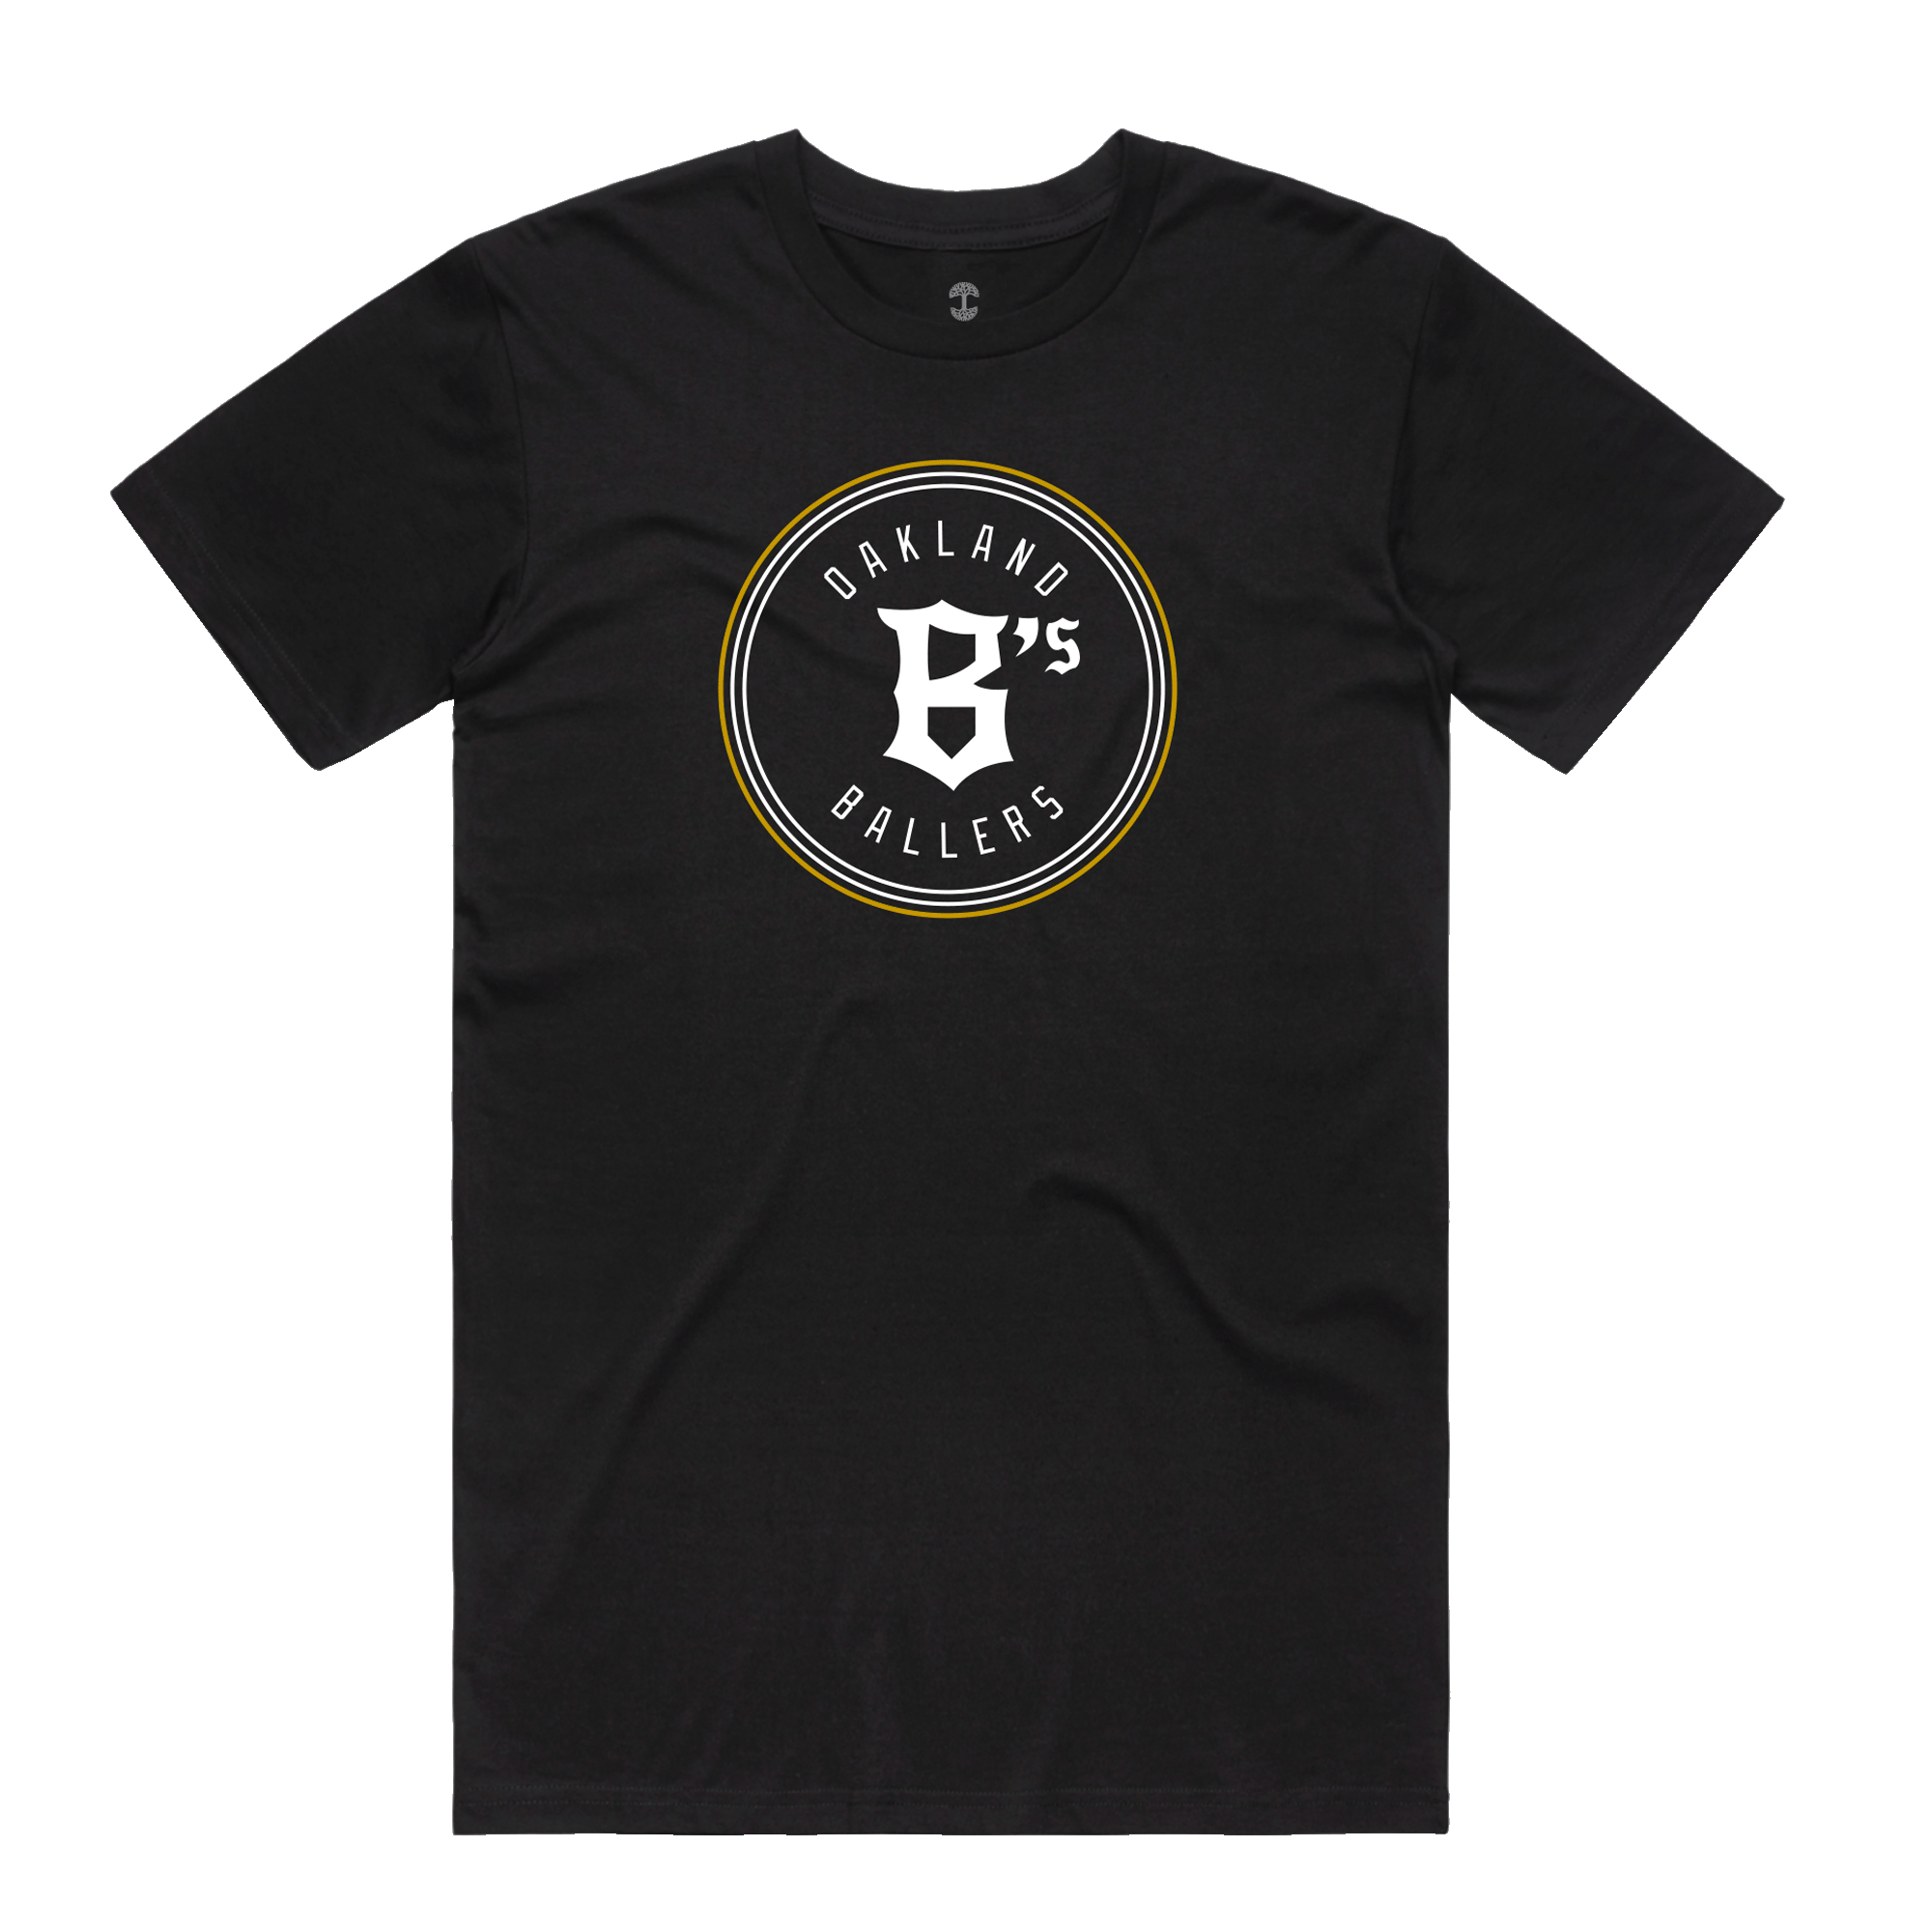 Front view of a black t-shirt with Oakland B's Ballers classic white and gold logo on the chest.